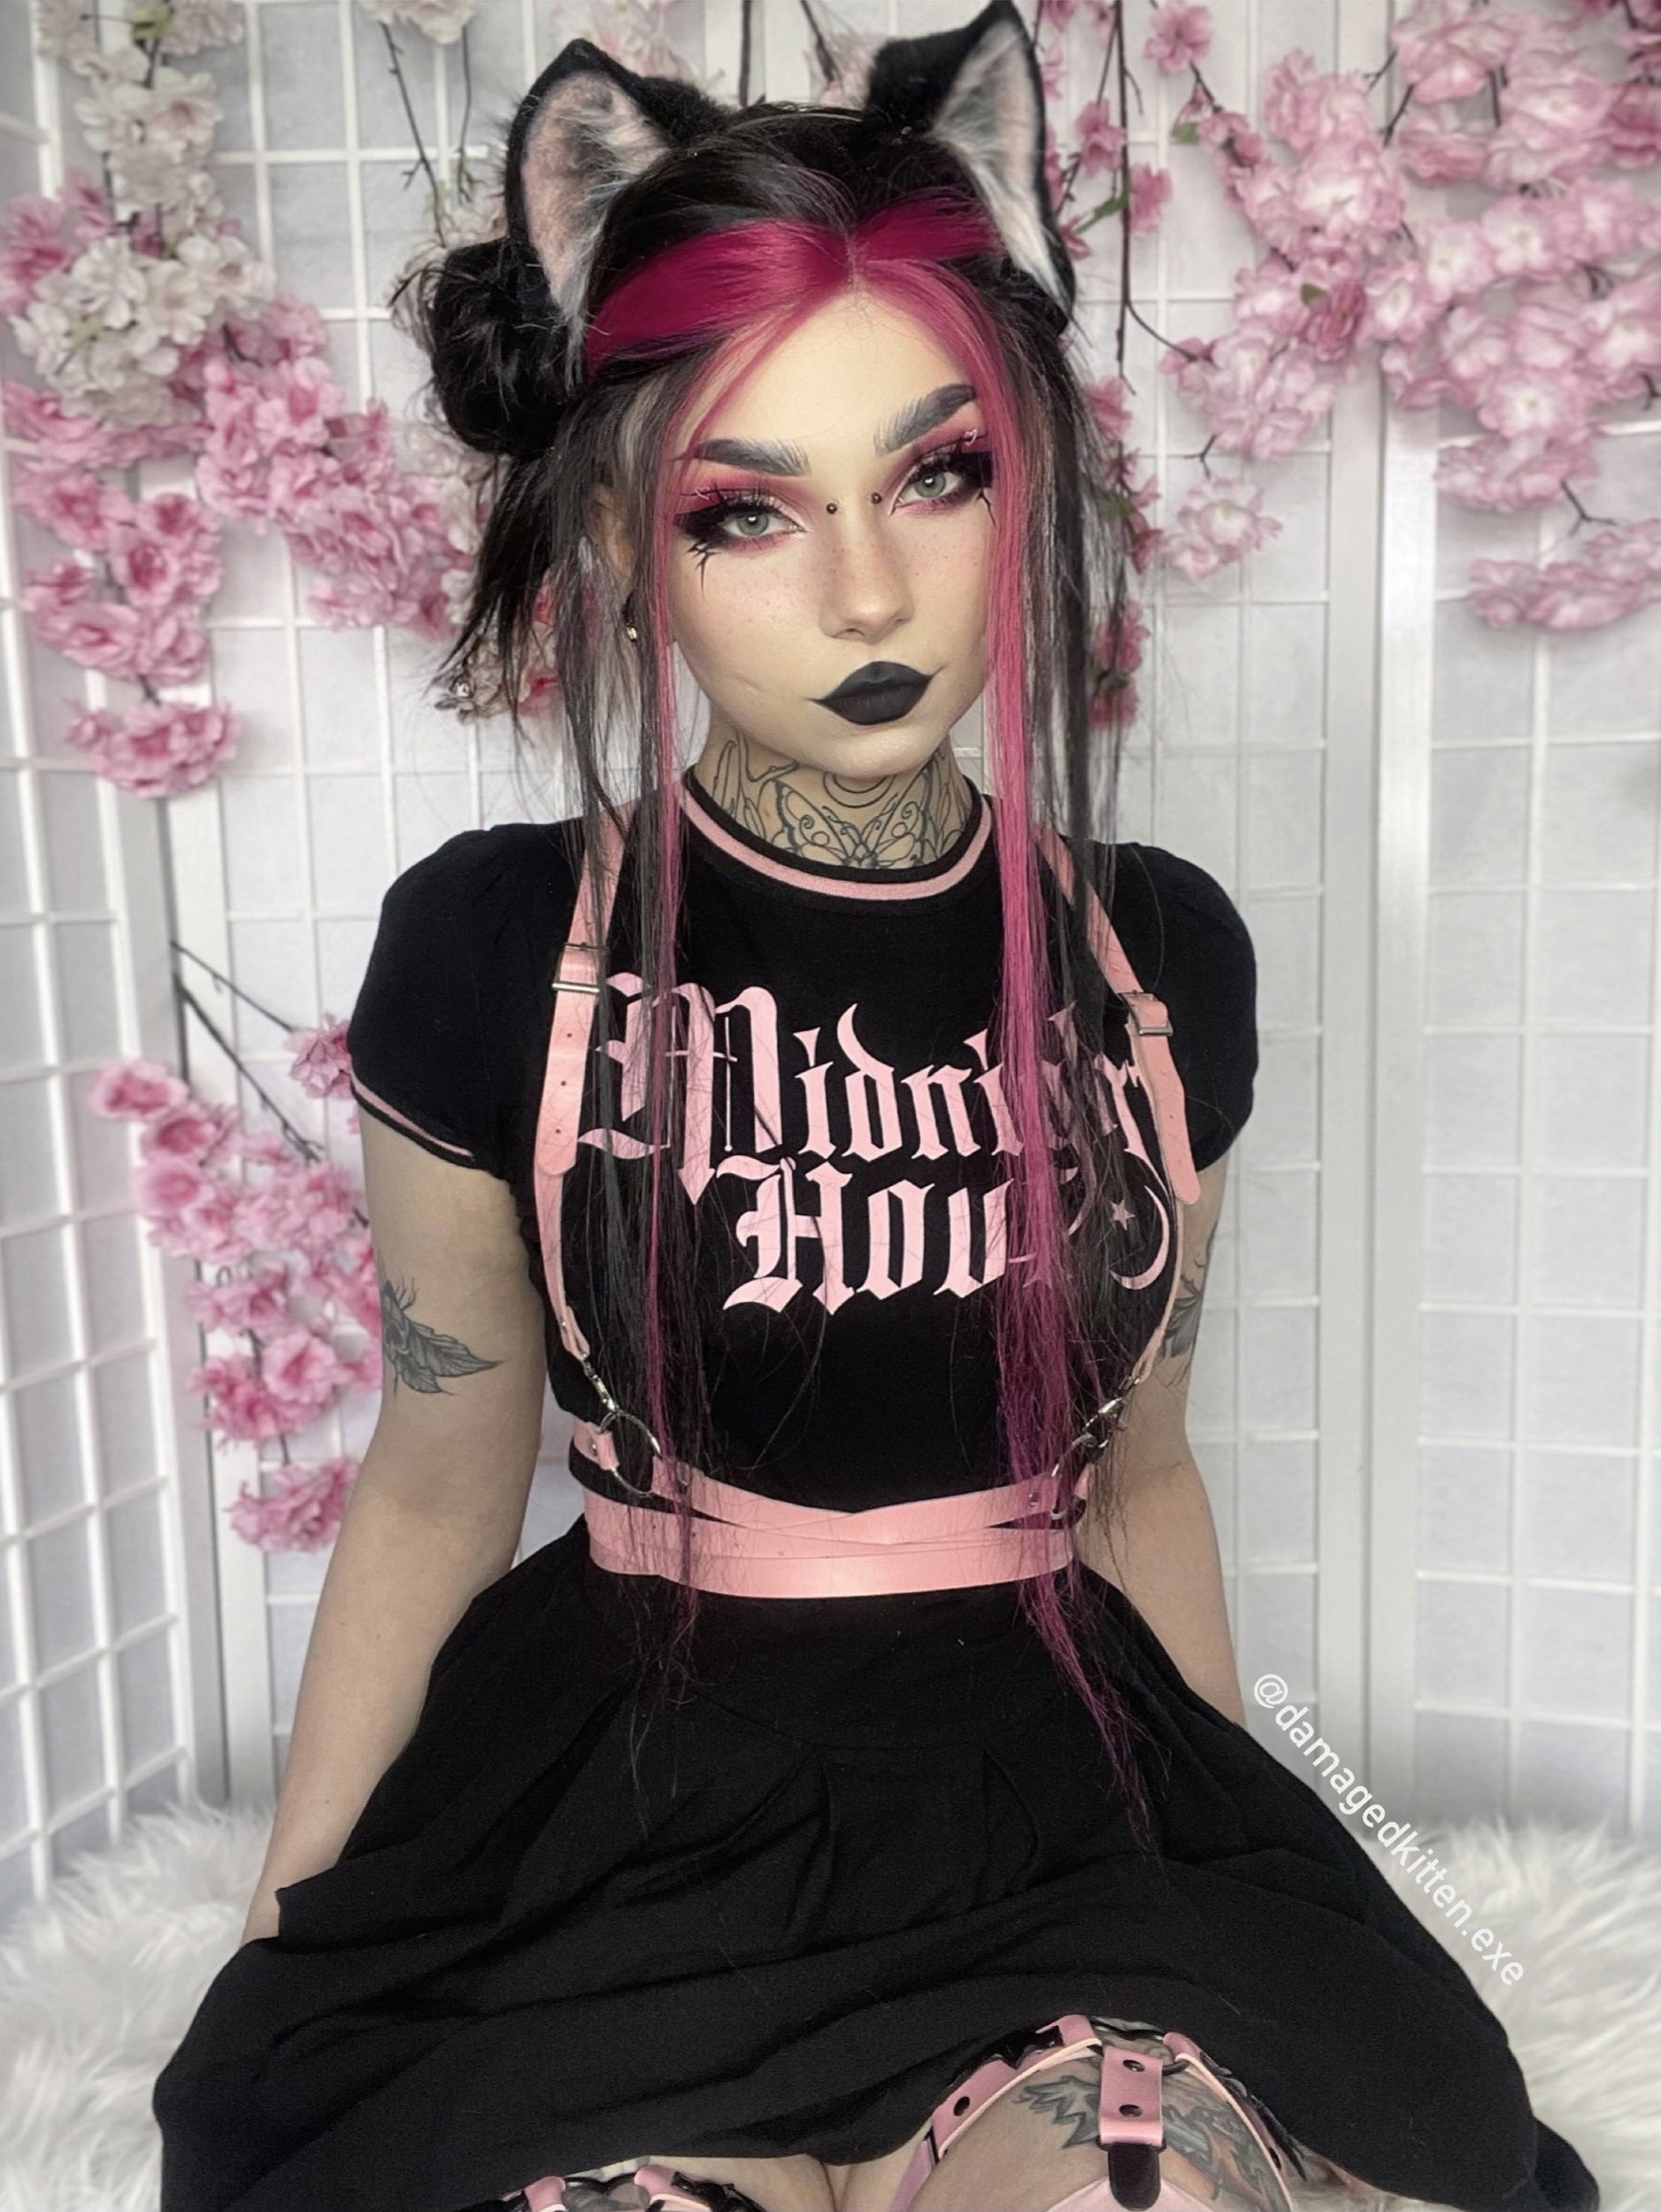 Pastel Goth Clothing | Pastel Goth Fashion & Outfits